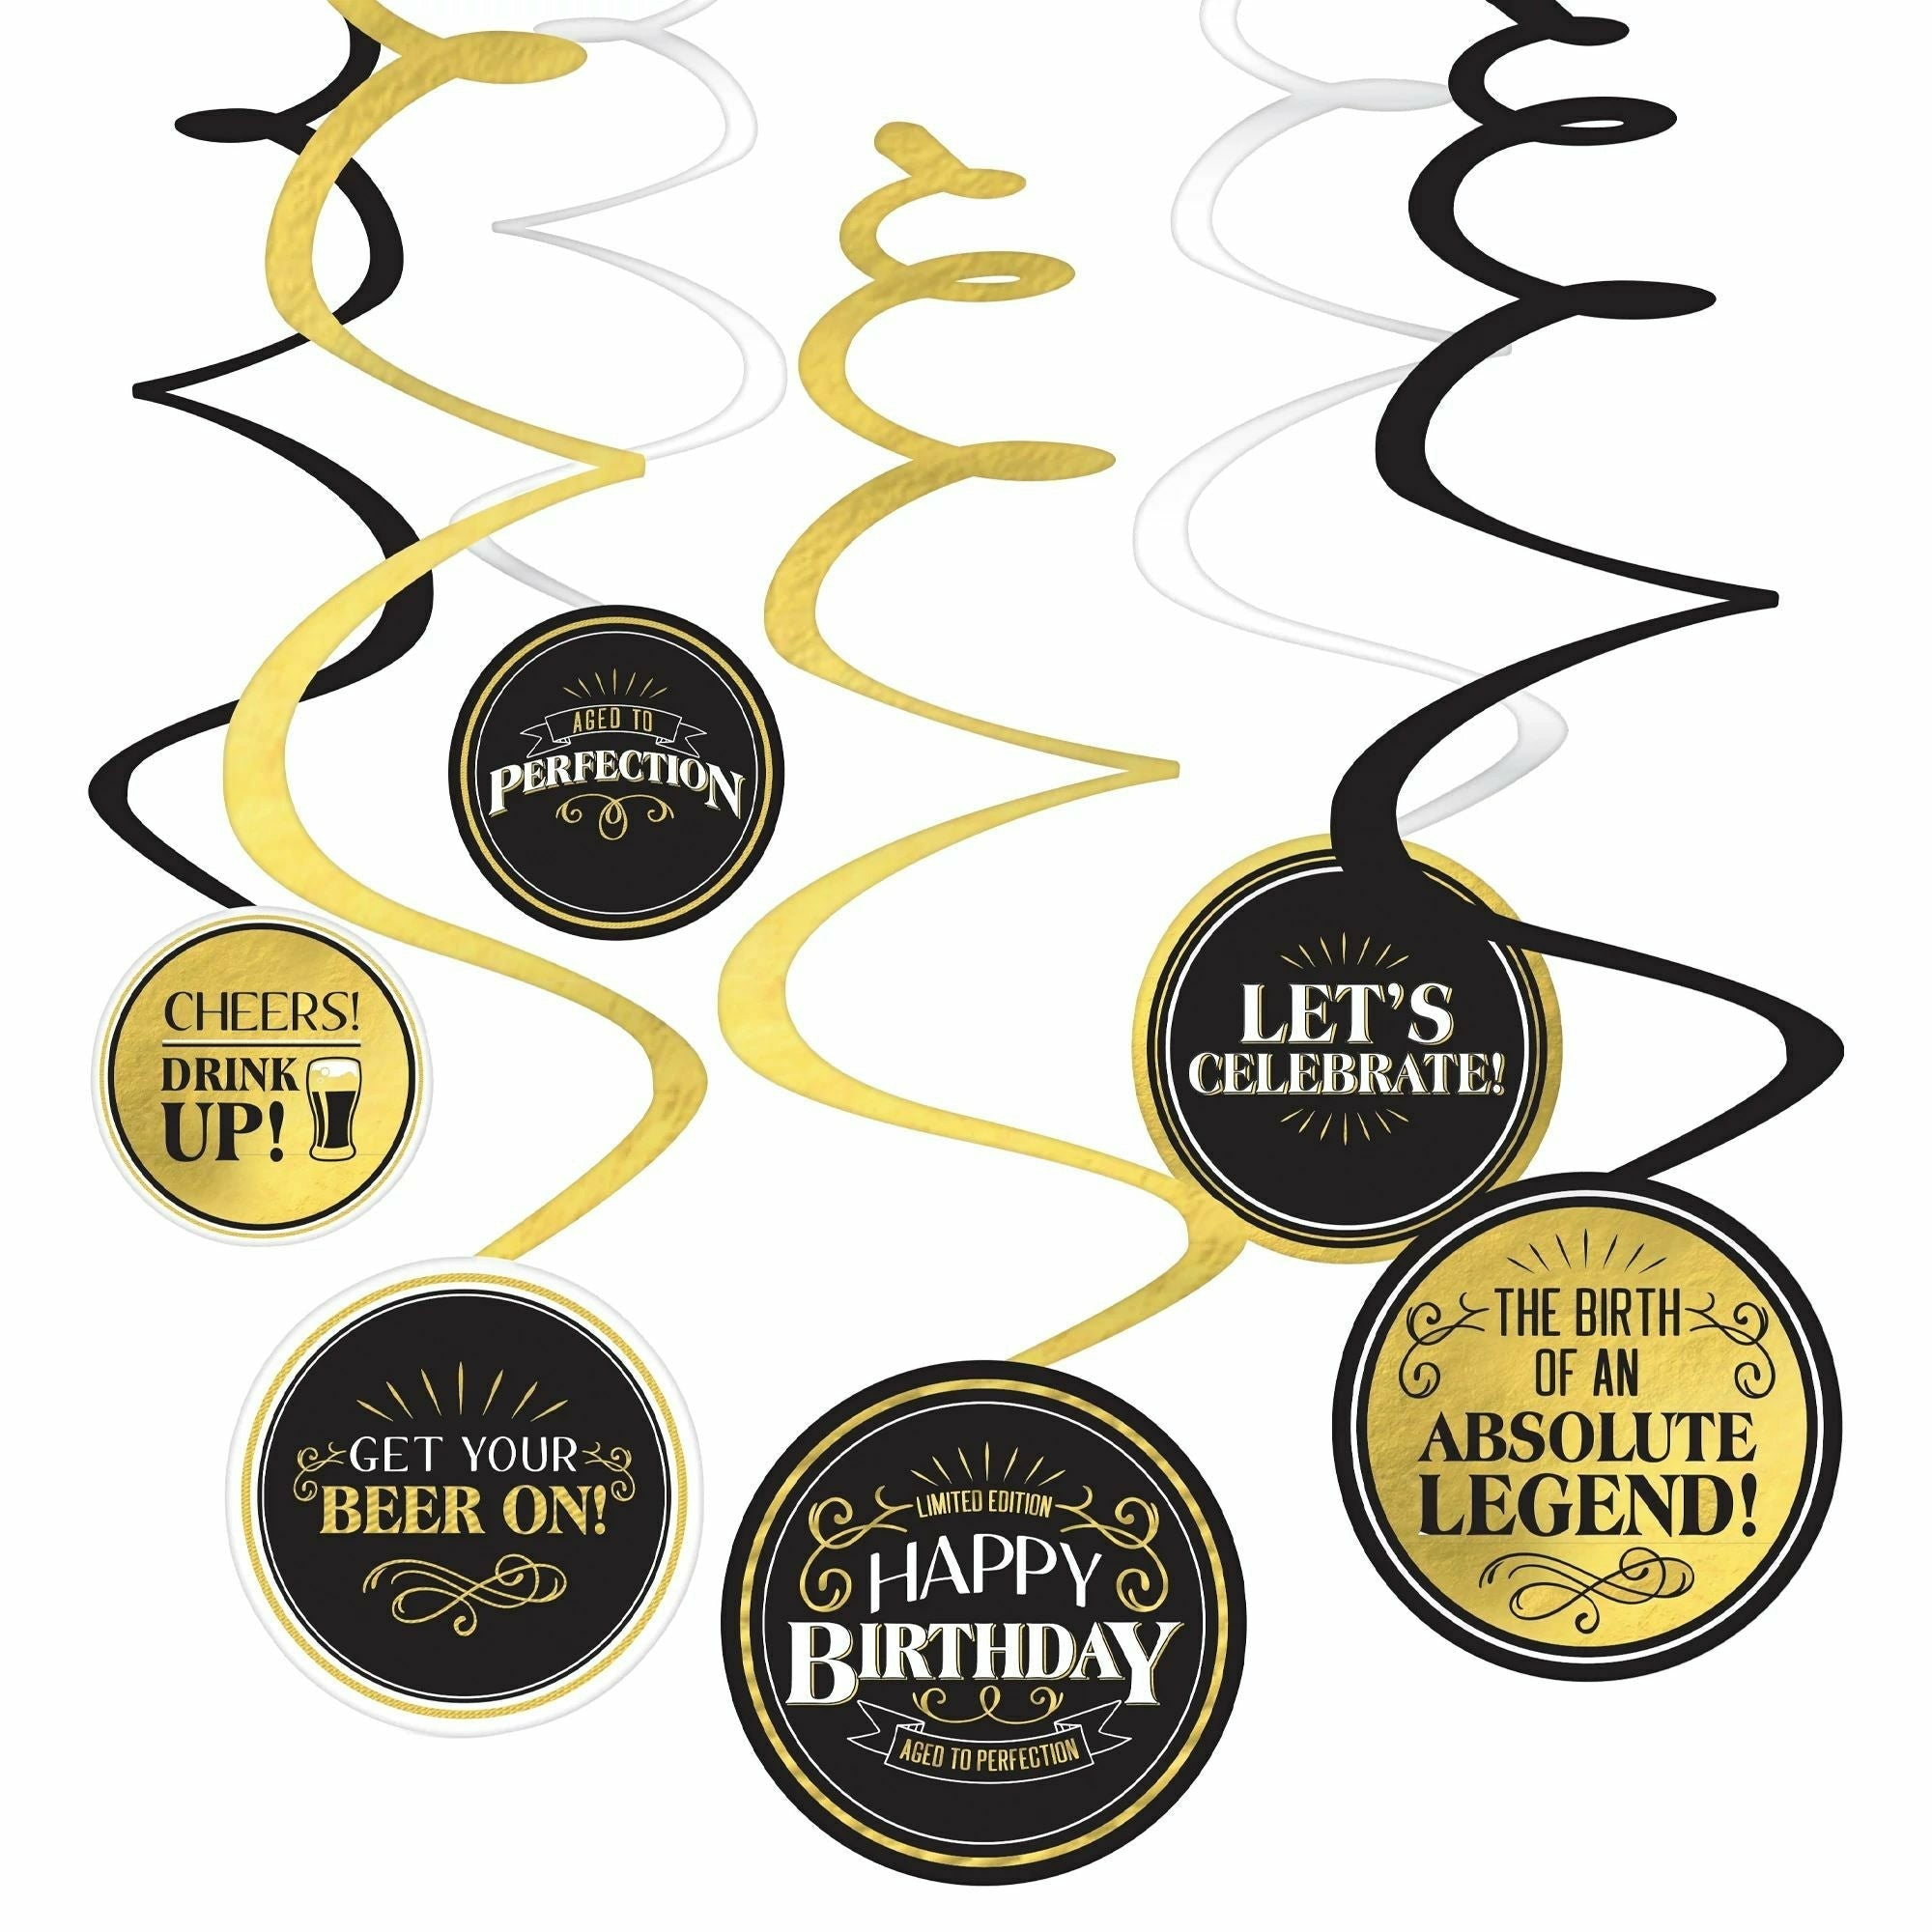 Amscan BIRTHDAY: OVER THE HILL Better with Age Birthday Spiral Decoration Value Pack